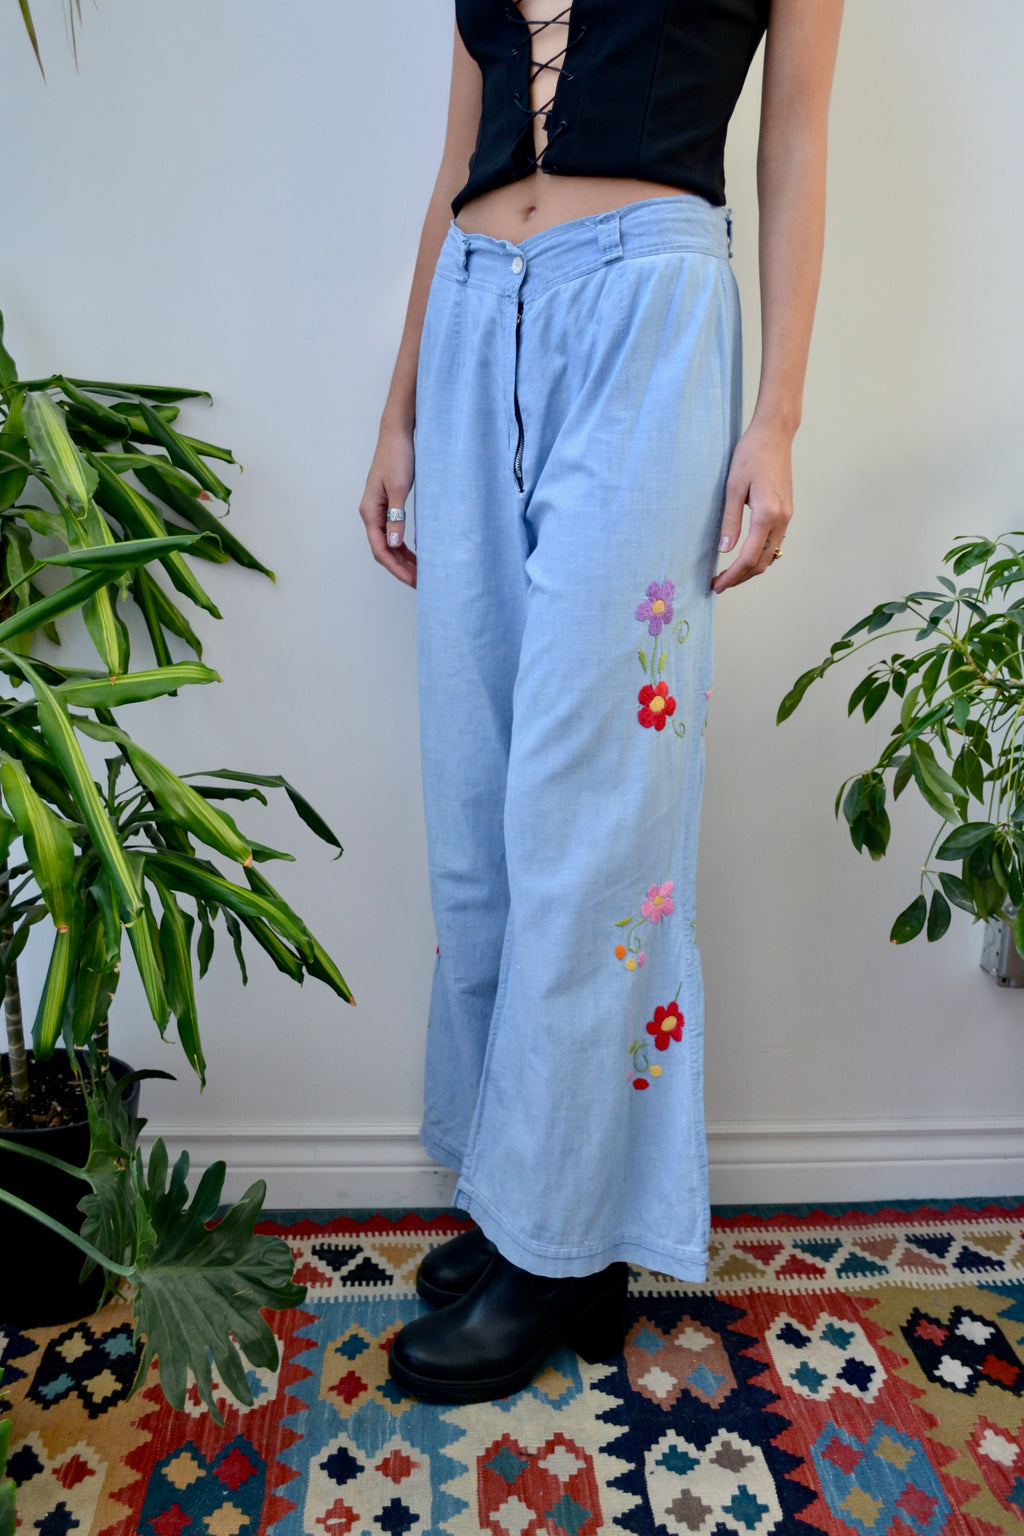 Flower Power Chambray Flares